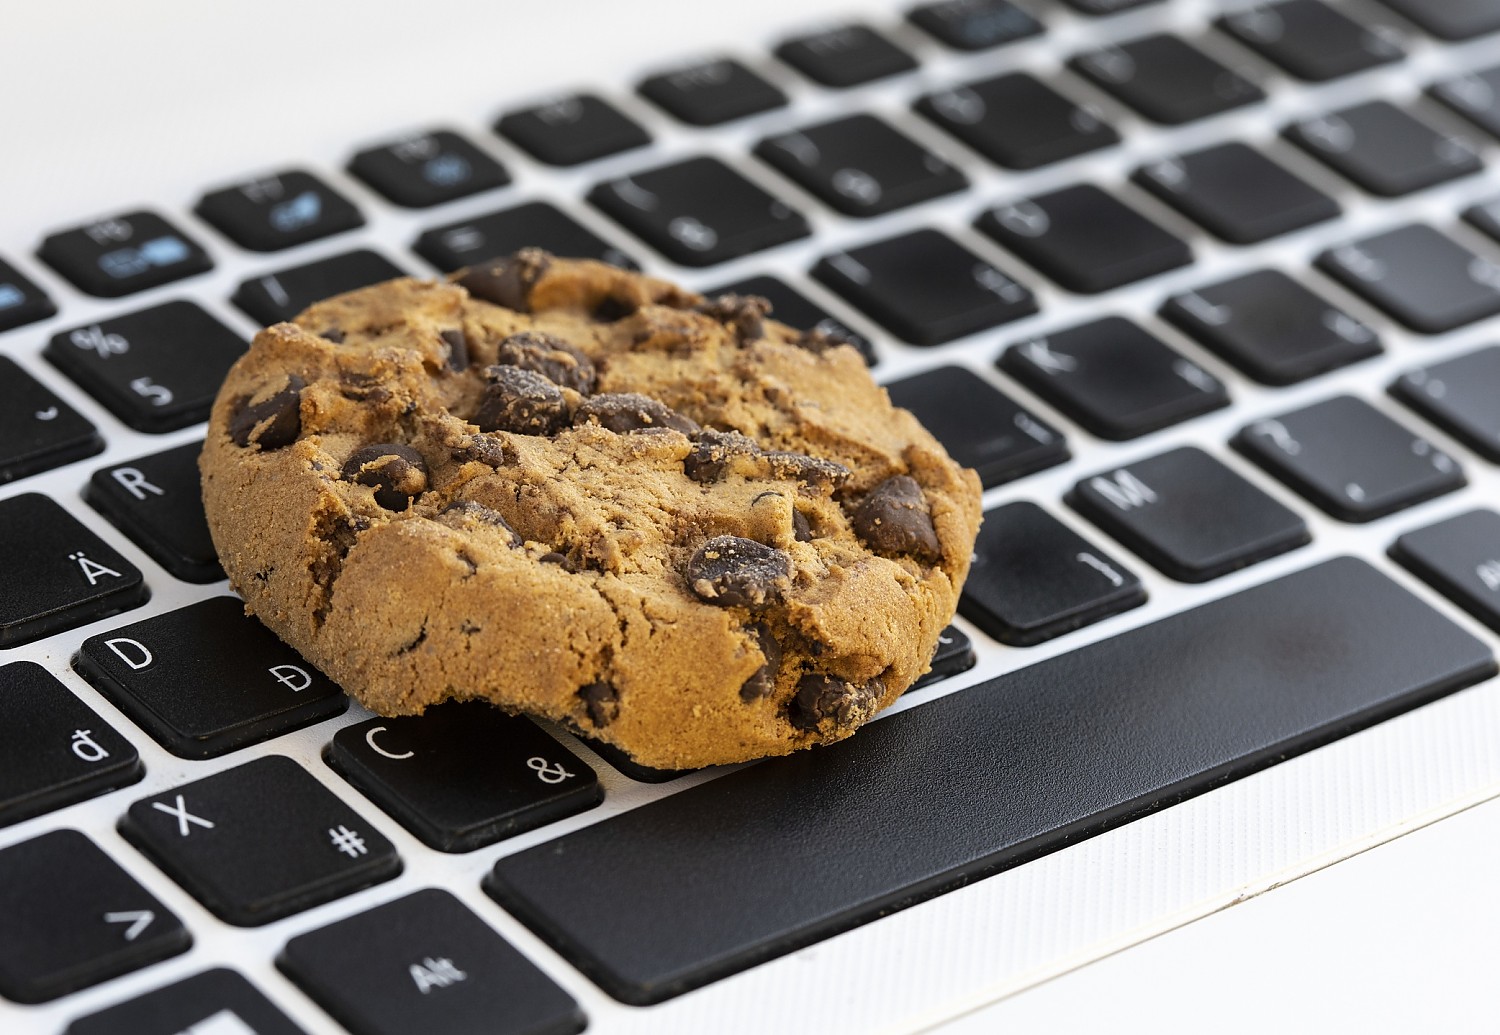 With the Black Friday craze, the craze for acceptance of Cookie Policy on websites is accentuated